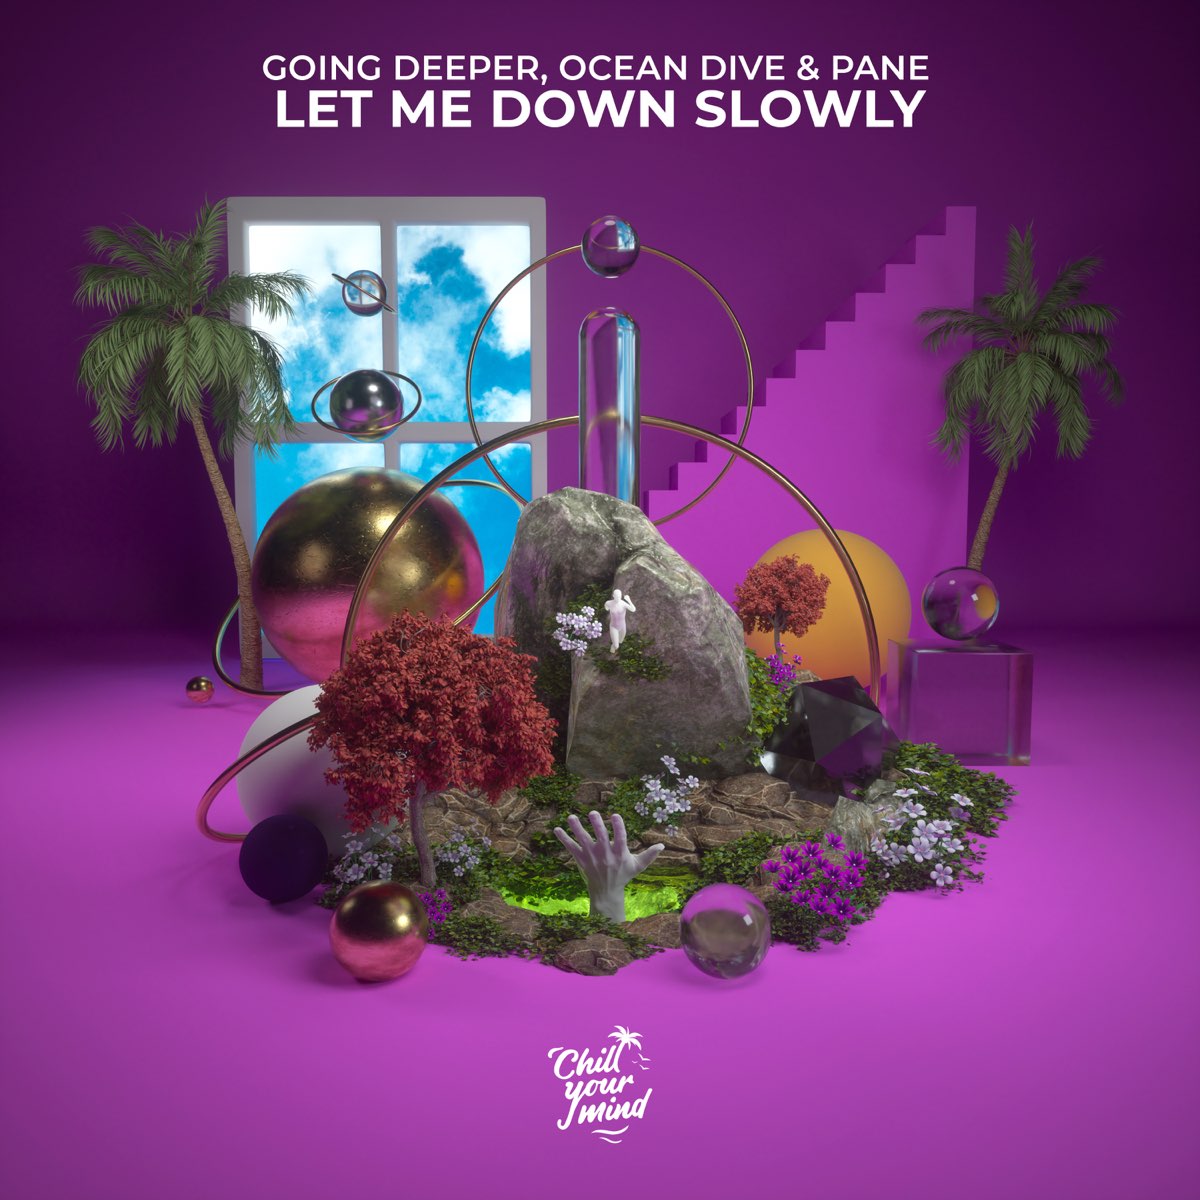 Going deeper missing. Let me down slowly (feat. Alessia cara) Alec Benjamin feat. Alessia cara. Good loyal thots (feat. Odetari) [Slowed & reverbed].